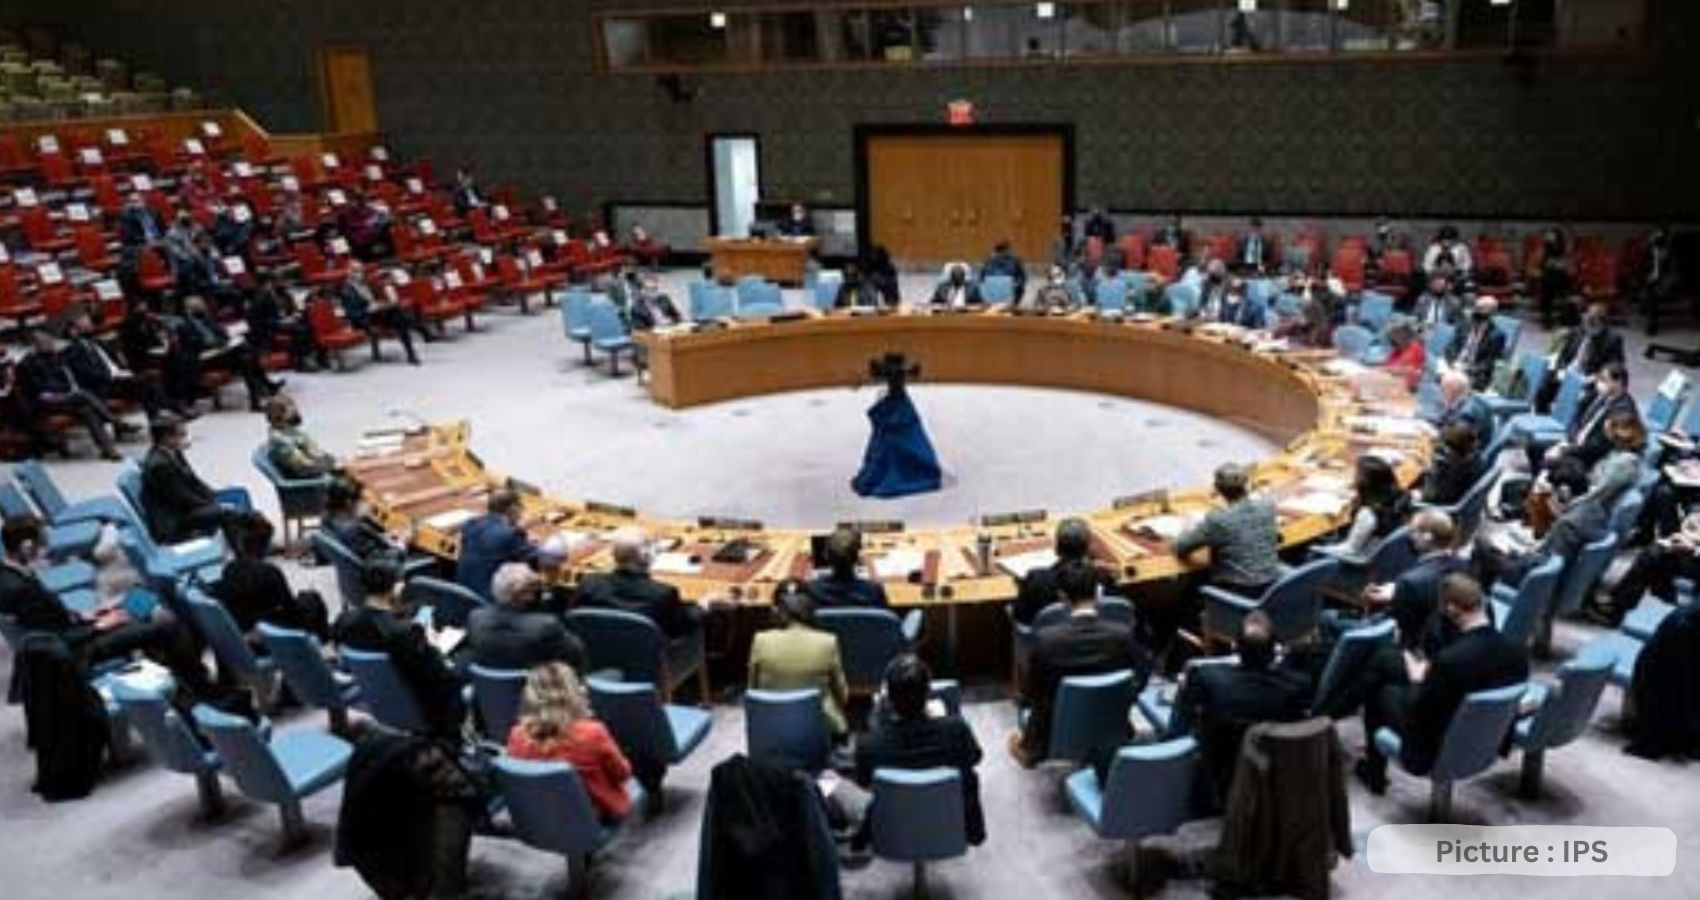 Big 5 Are At The Heart Of The Problem In Reforming UNSC